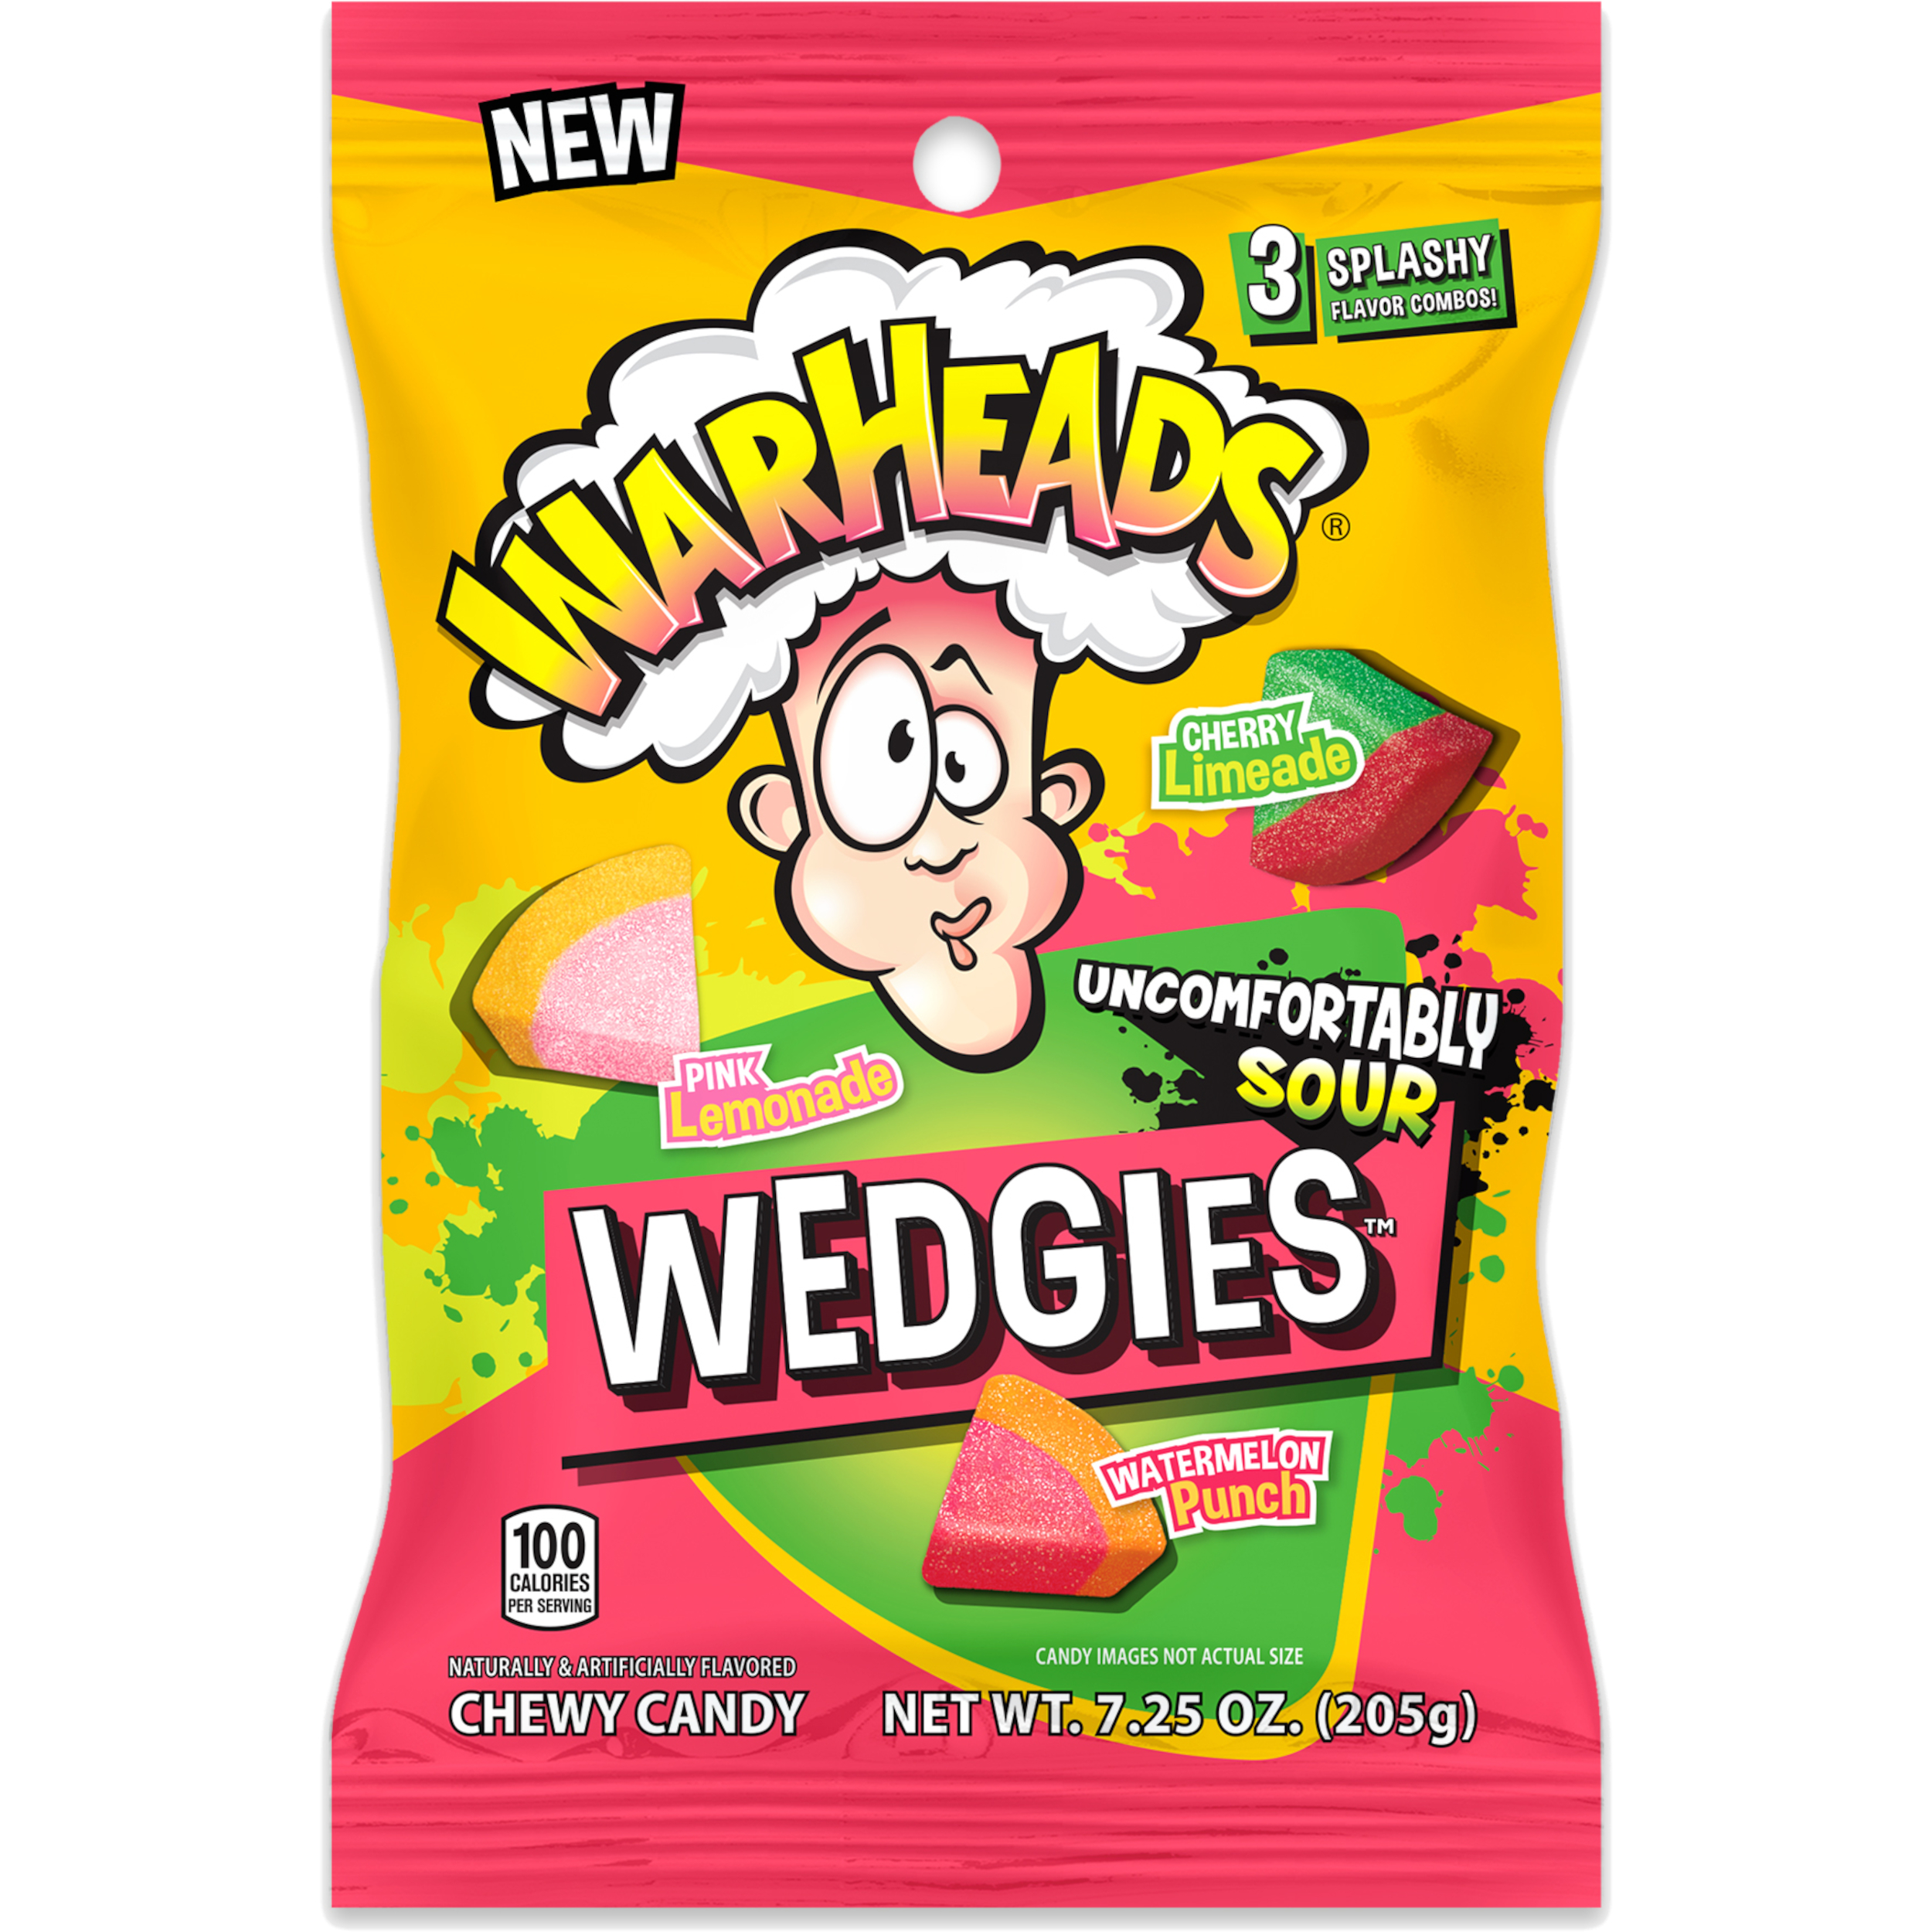 Warheads Wedgies Chewy Sour Candy, Assorted Flavors, 7.25oz - image 1 of 6